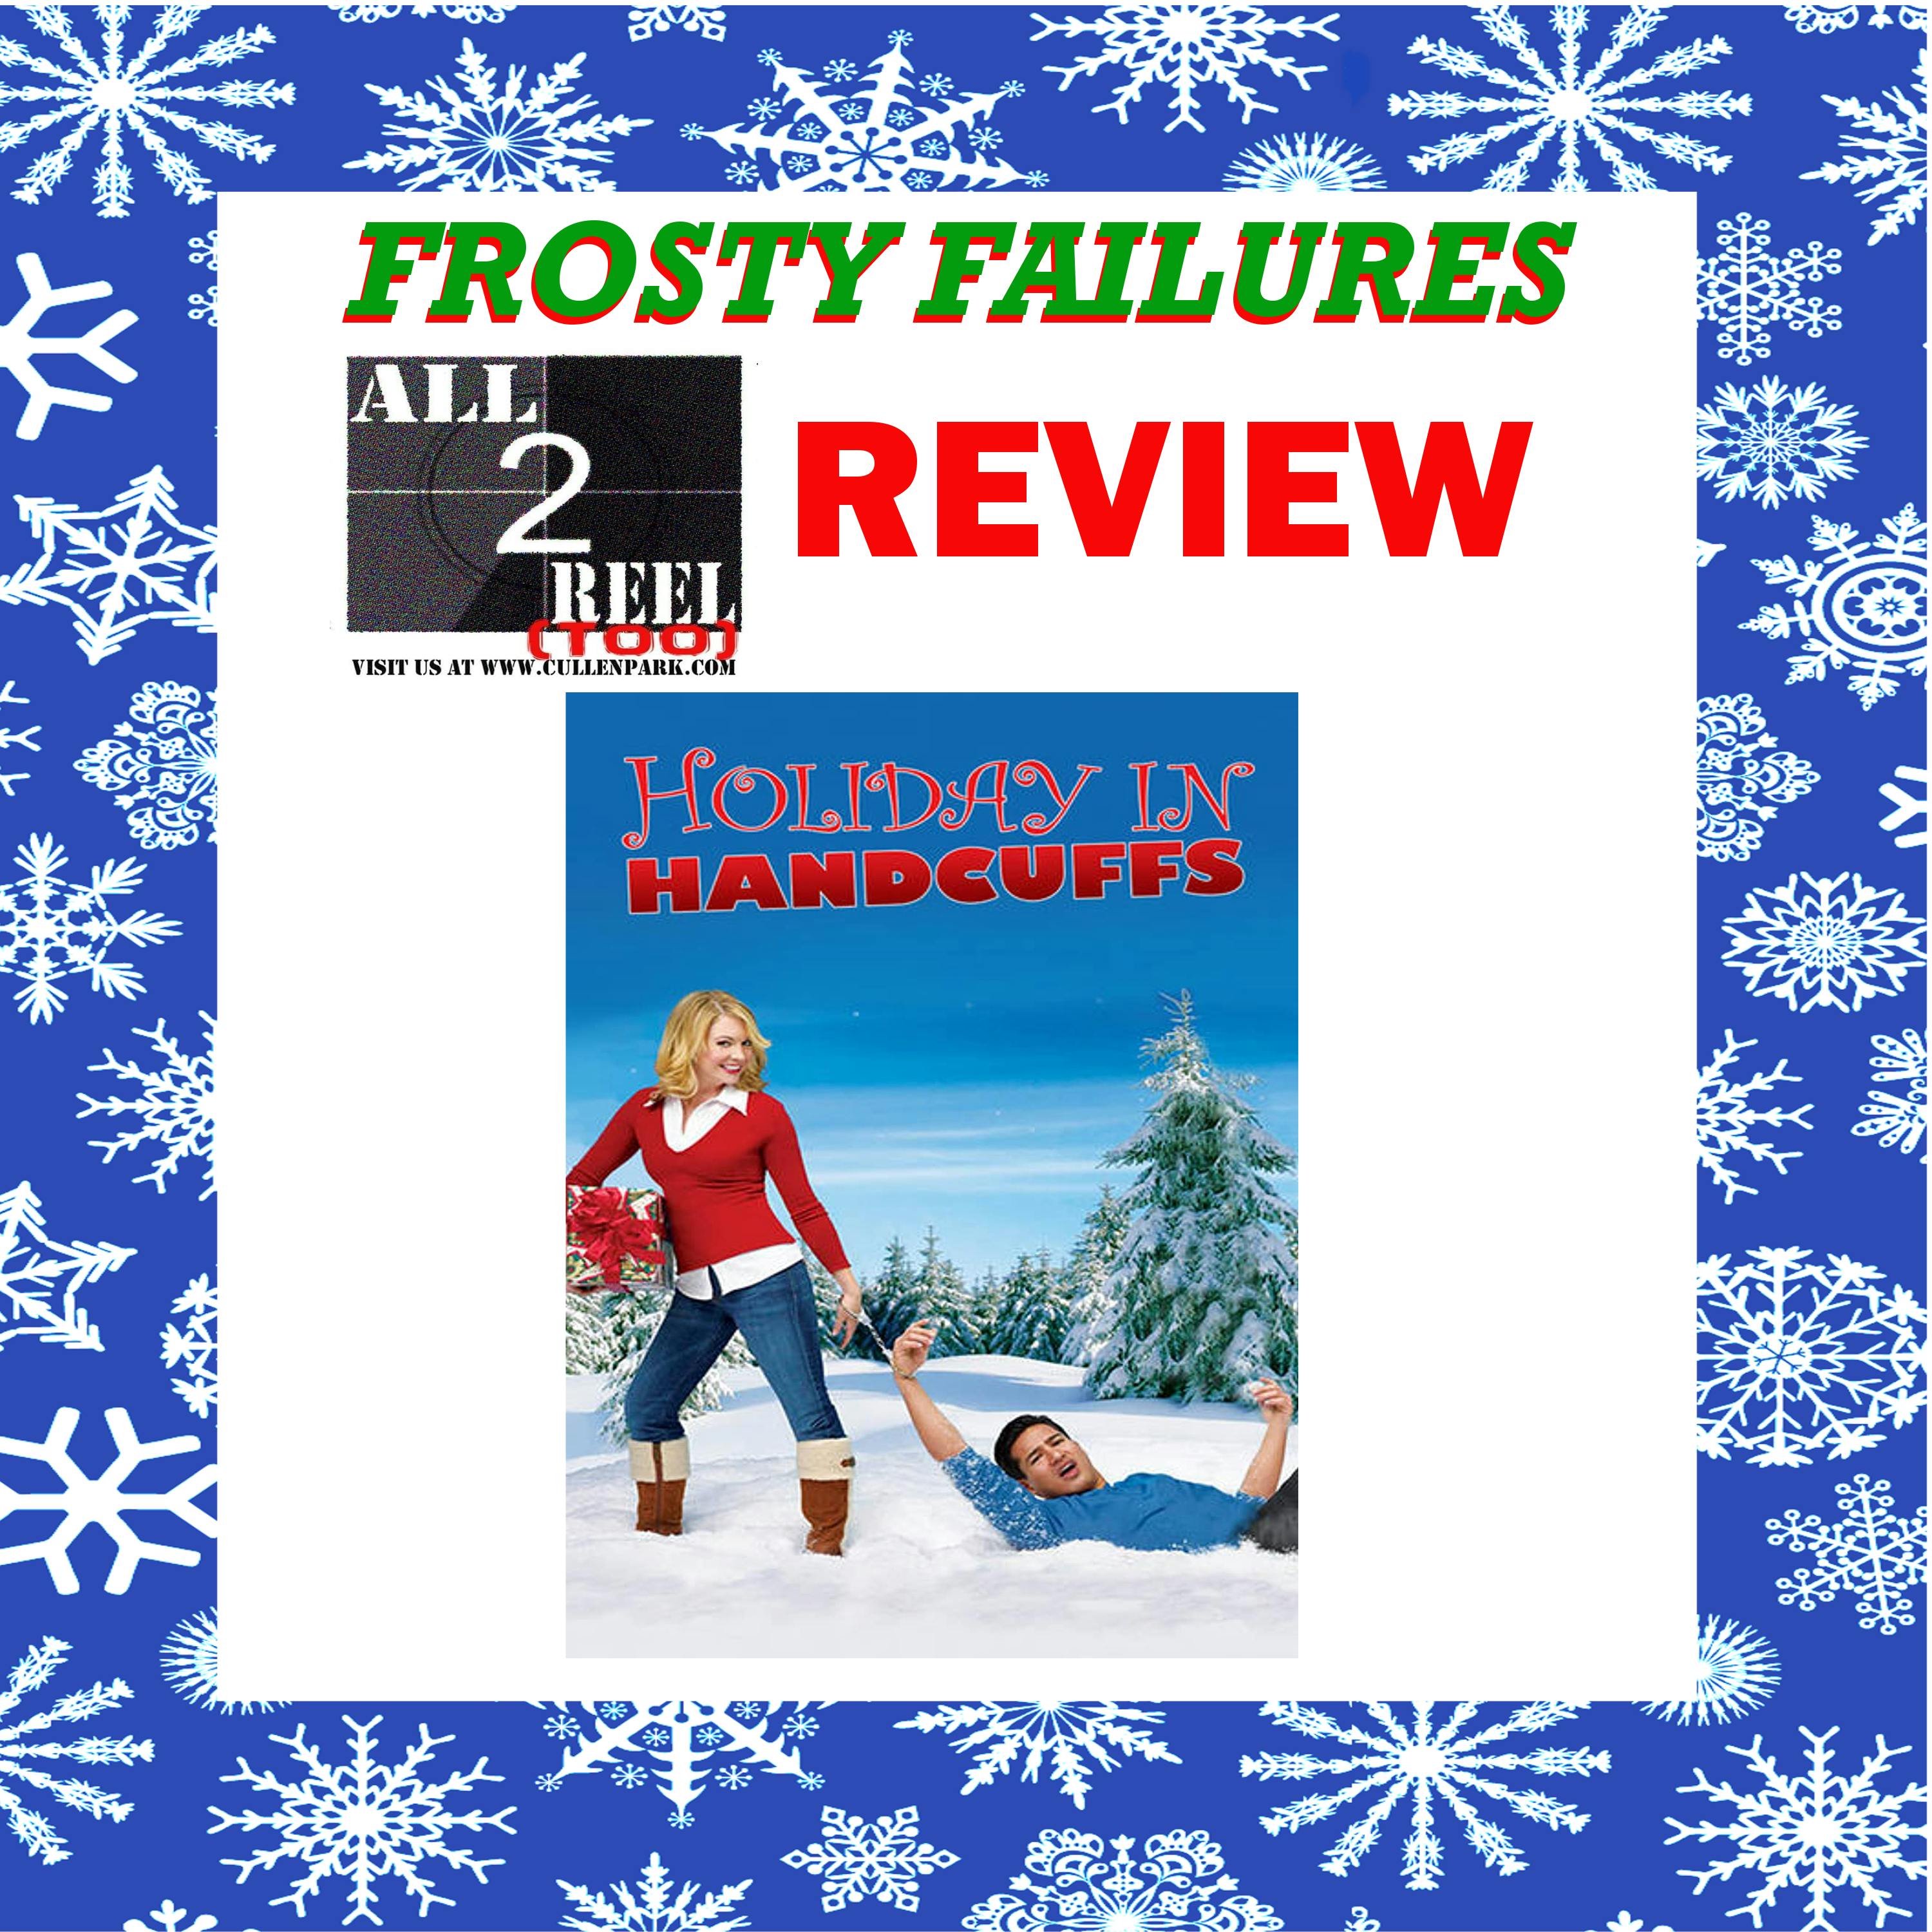 Holiday in Handcuffs (2006) - FROSTY FAILURES REVIEW